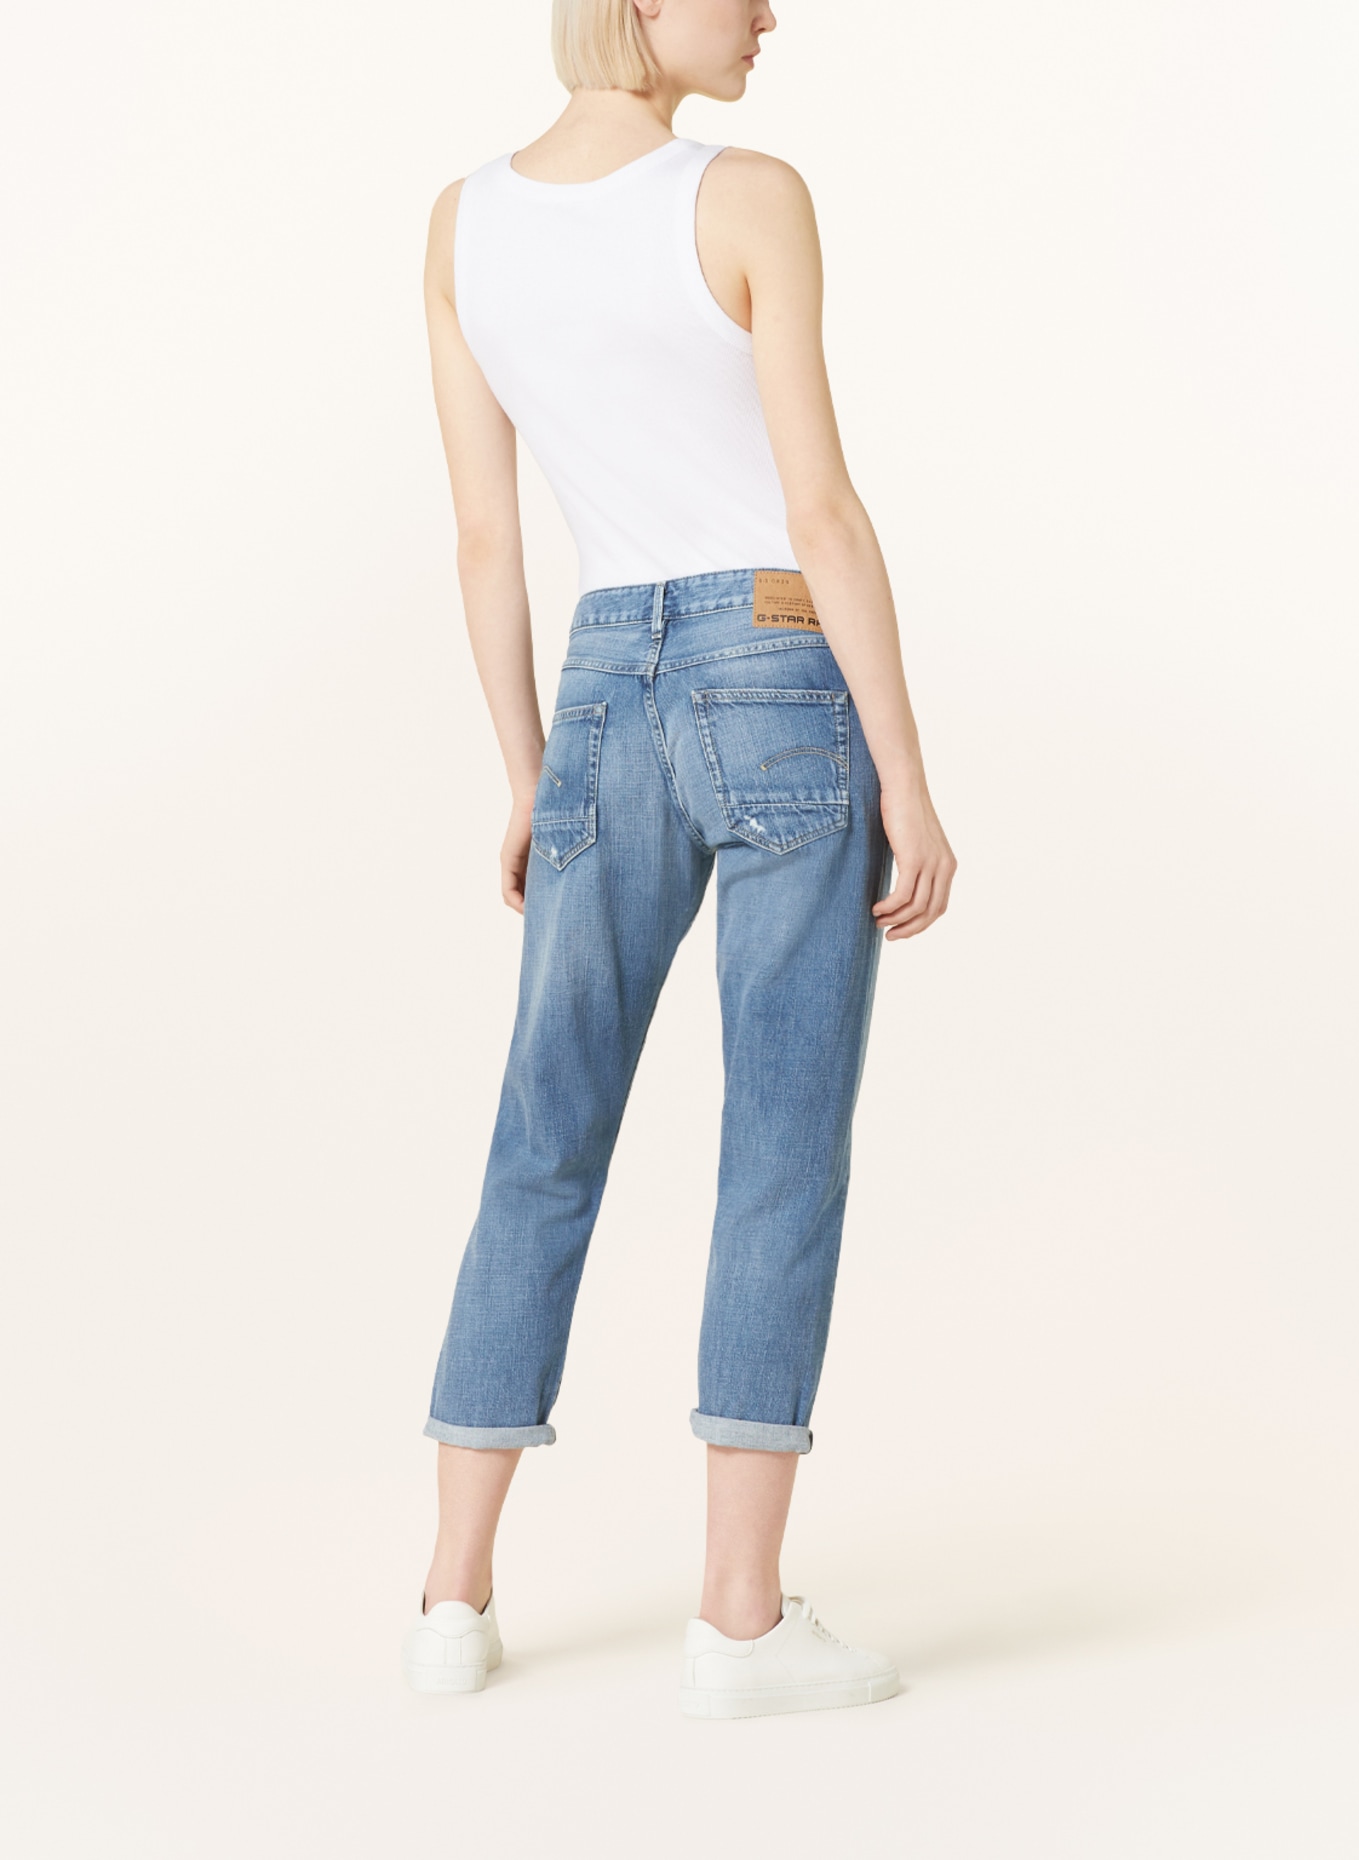 G-Star RAW Destroyed Jeans KATE, Farbe: D894 faded ripped waterfront (Bild 3)